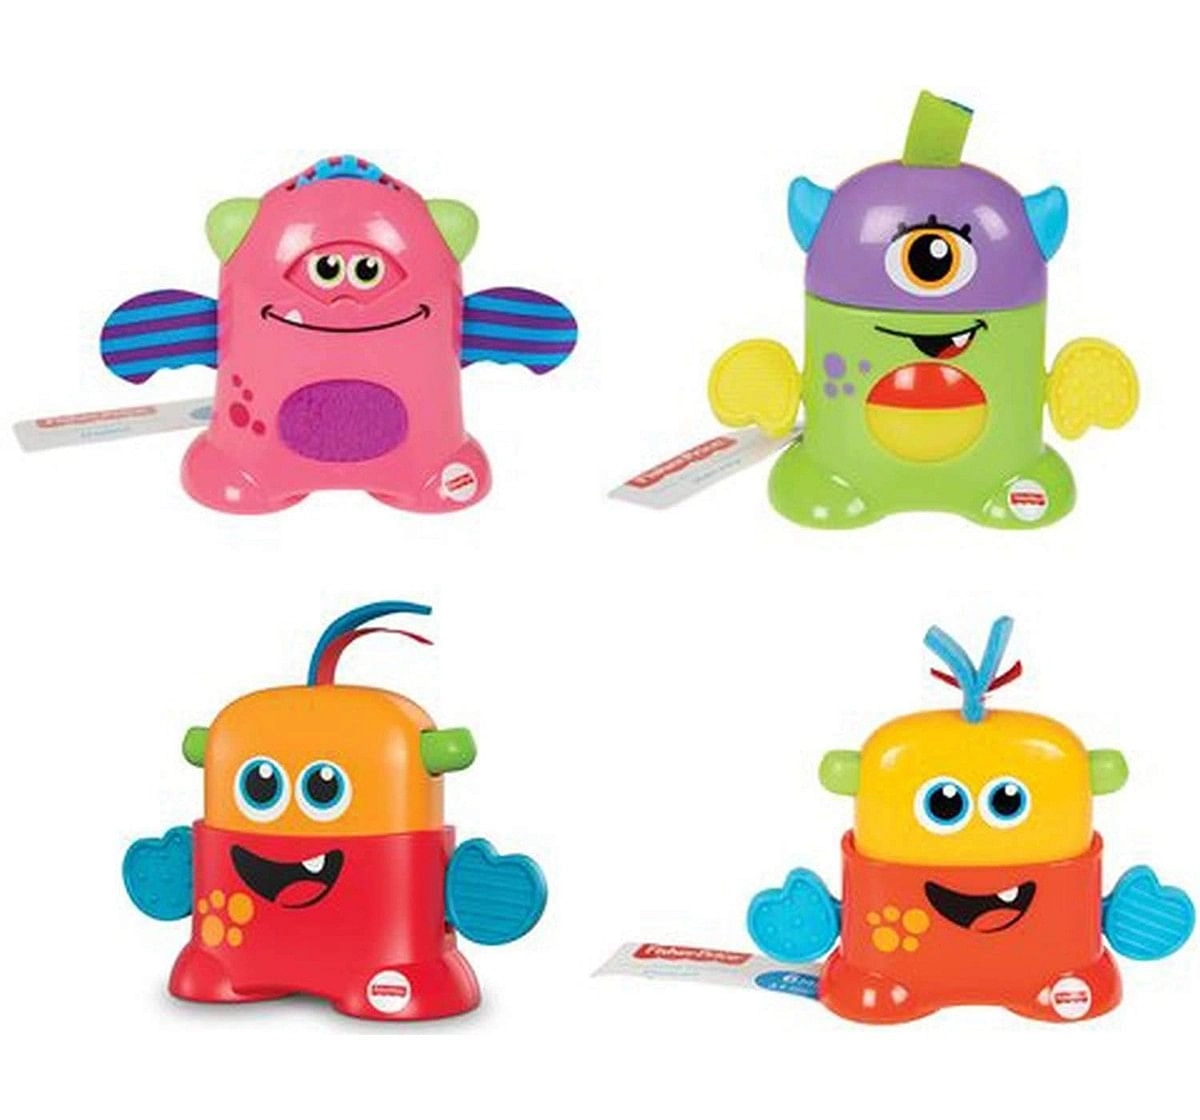 Fisher Price Tote - Along Monster Early Learner Toys for Kids age 6M+, Assorted